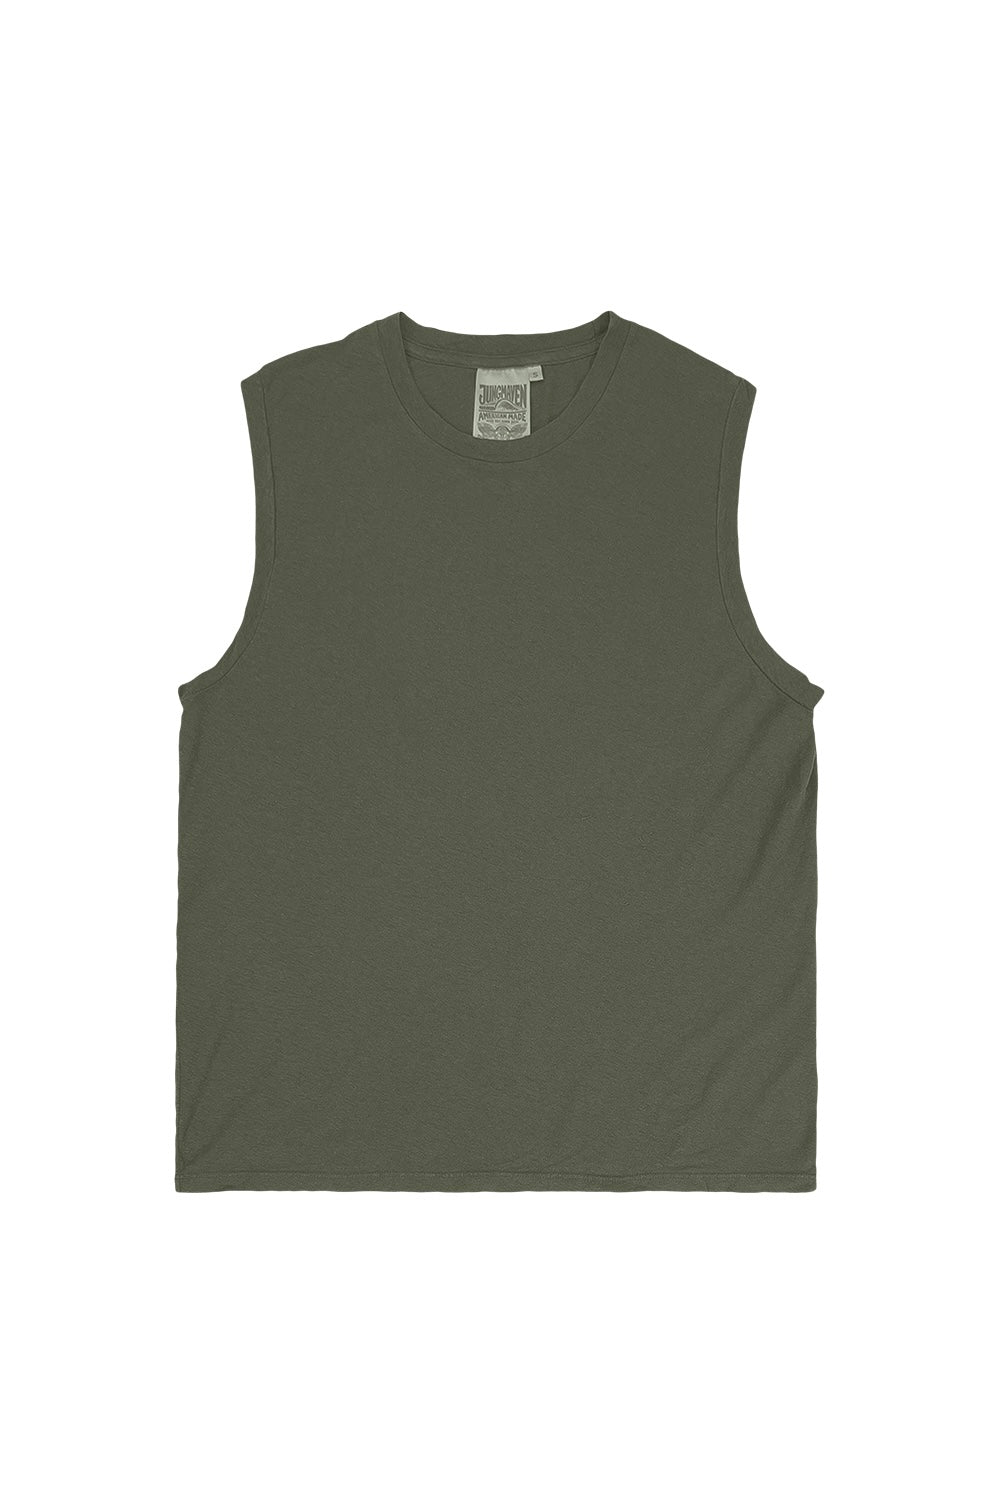 Malibu Muscle Tee | Jungmaven Hemp Clothing & Accessories / Color: Olive Green